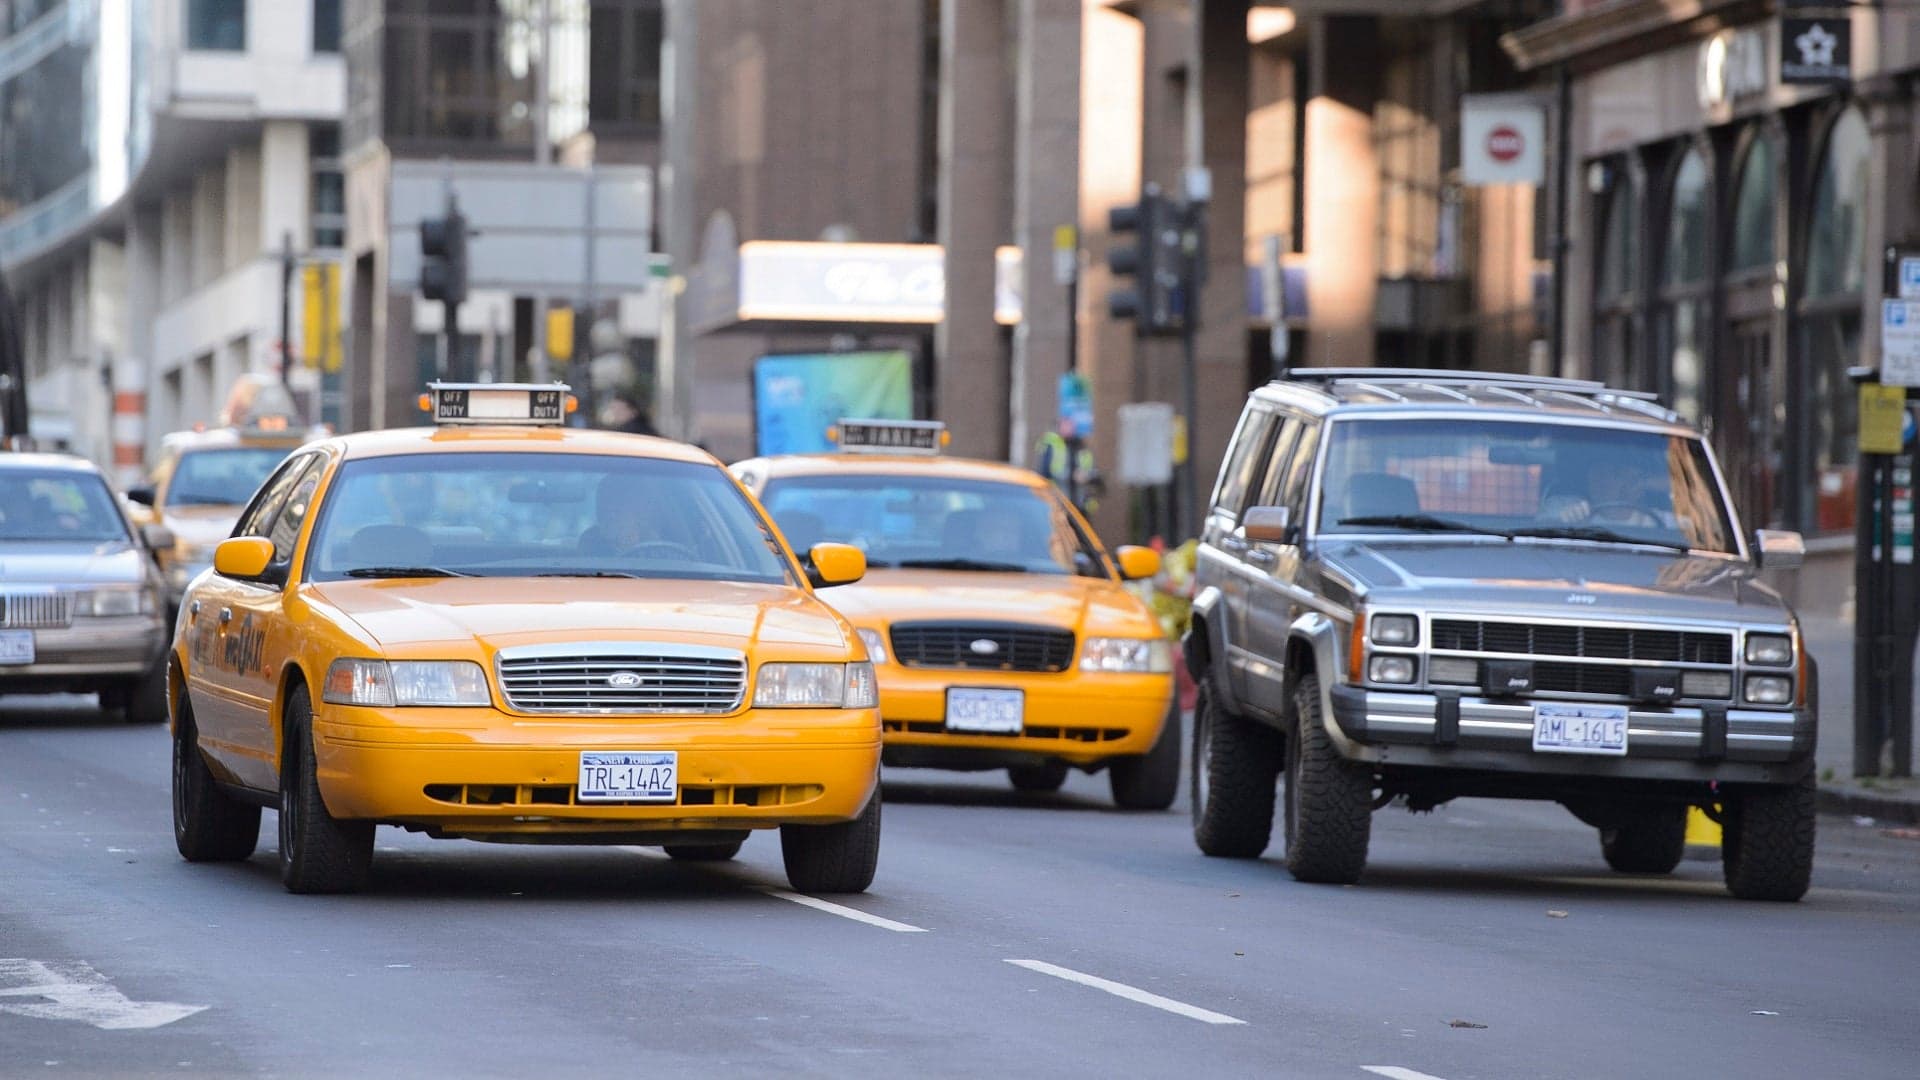 Cab Companies on Uber and Lyft: If You Can’t Beat ‘Em, Join ‘Em